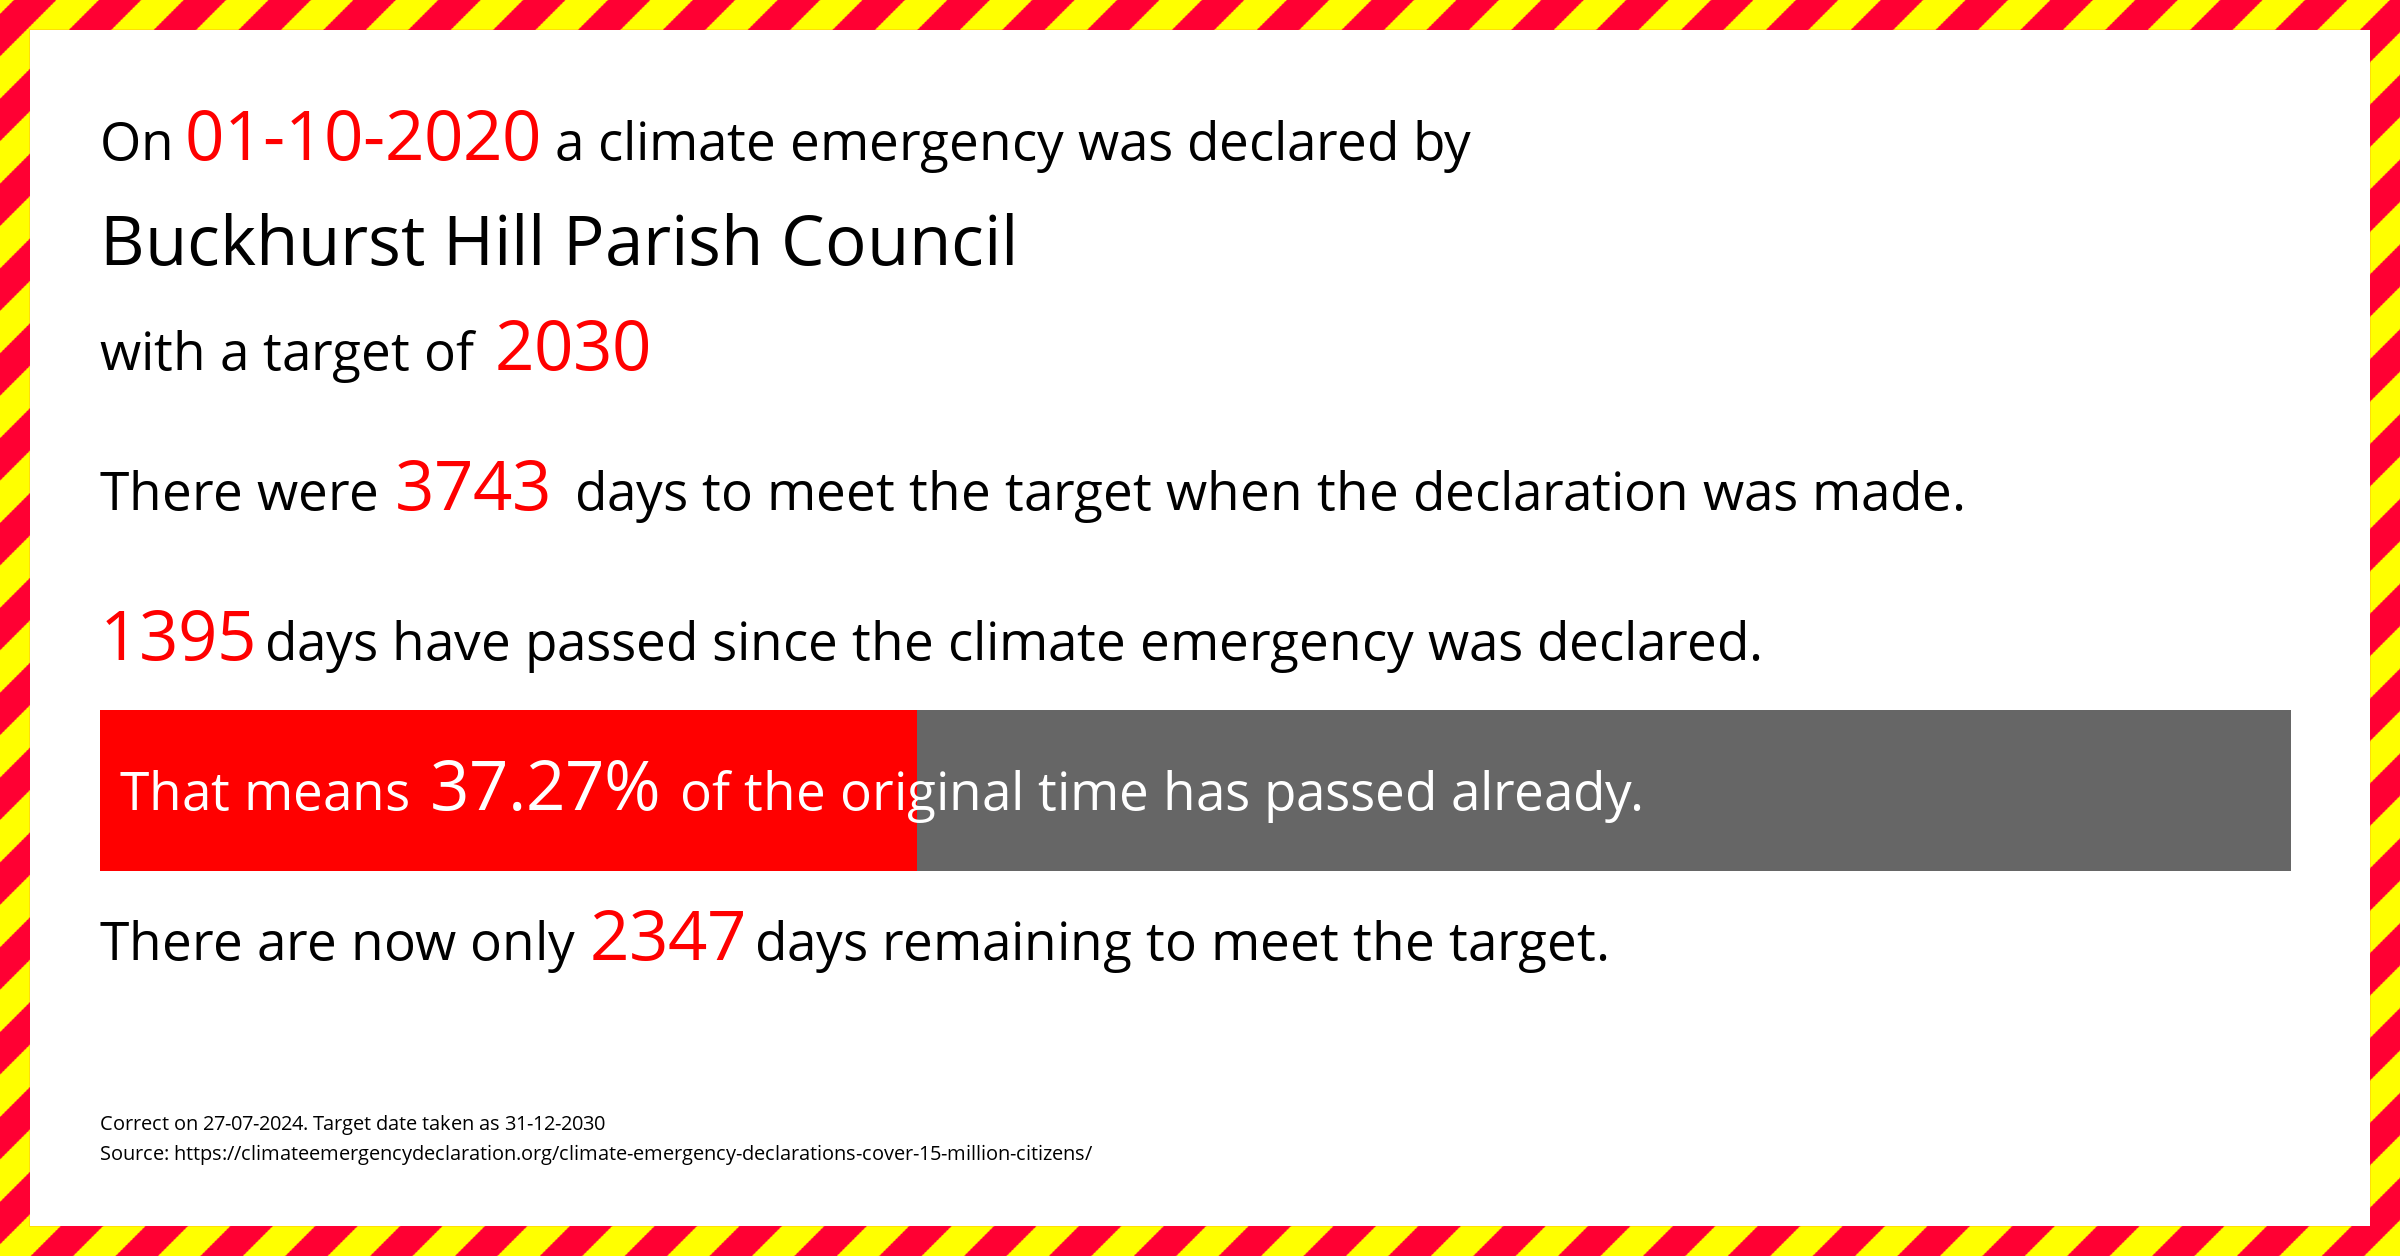 Buckhurst Hill Parish Council  declared a Climate emergency on Thursday 1st October 2020, with a target of 2030.